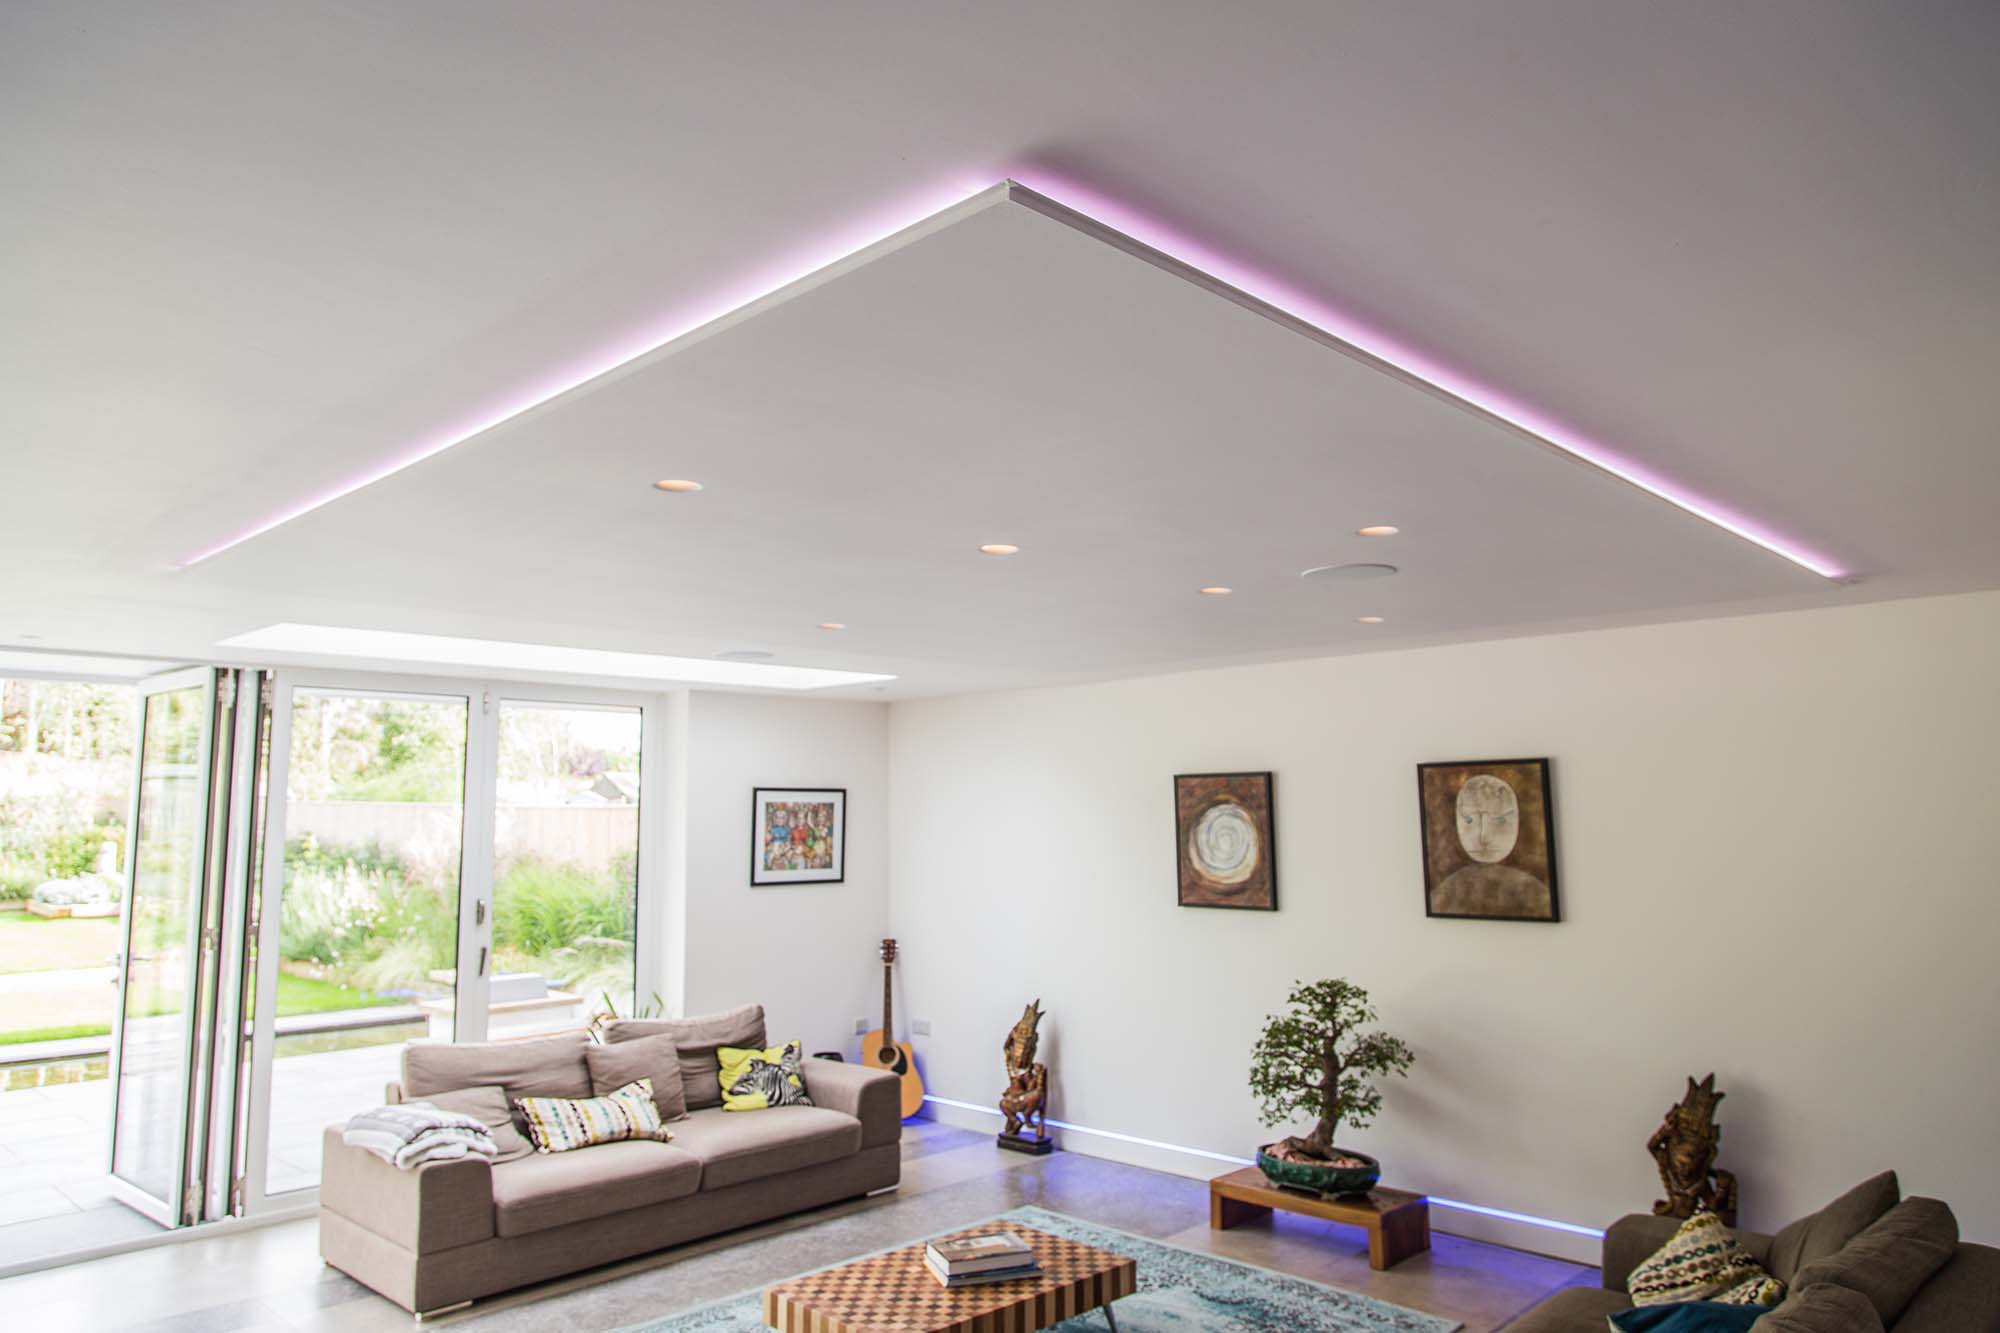 wiise - smart home installation london